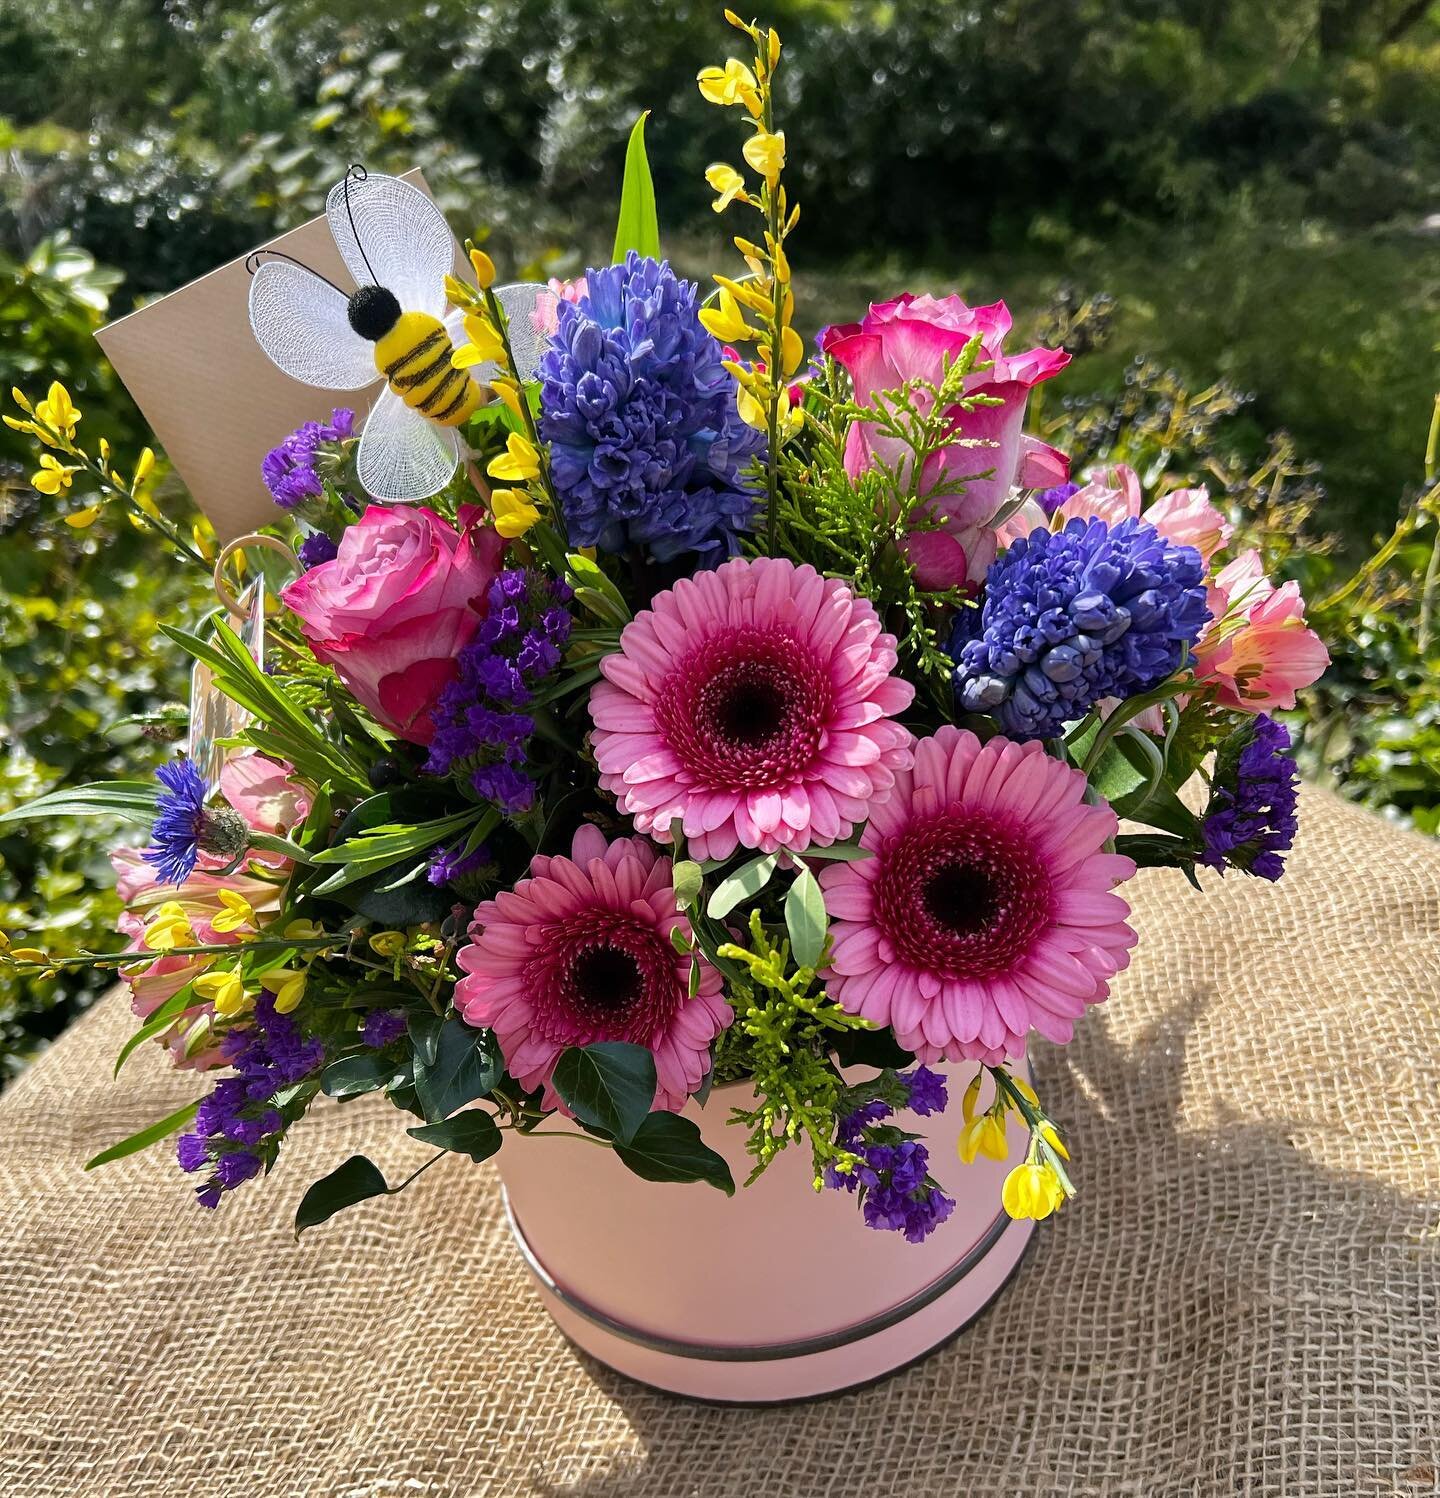 🐝 Happy 

Flowers for every occasion with FREE local delivery
.
.
.

#floirstnearme #denbigshireflorist #floristnorthwales #floralinstallation #floralinspiration #flowerdelivery #flowerdeliverynorthwales
#hangingflowers #suspendedflowers #installati